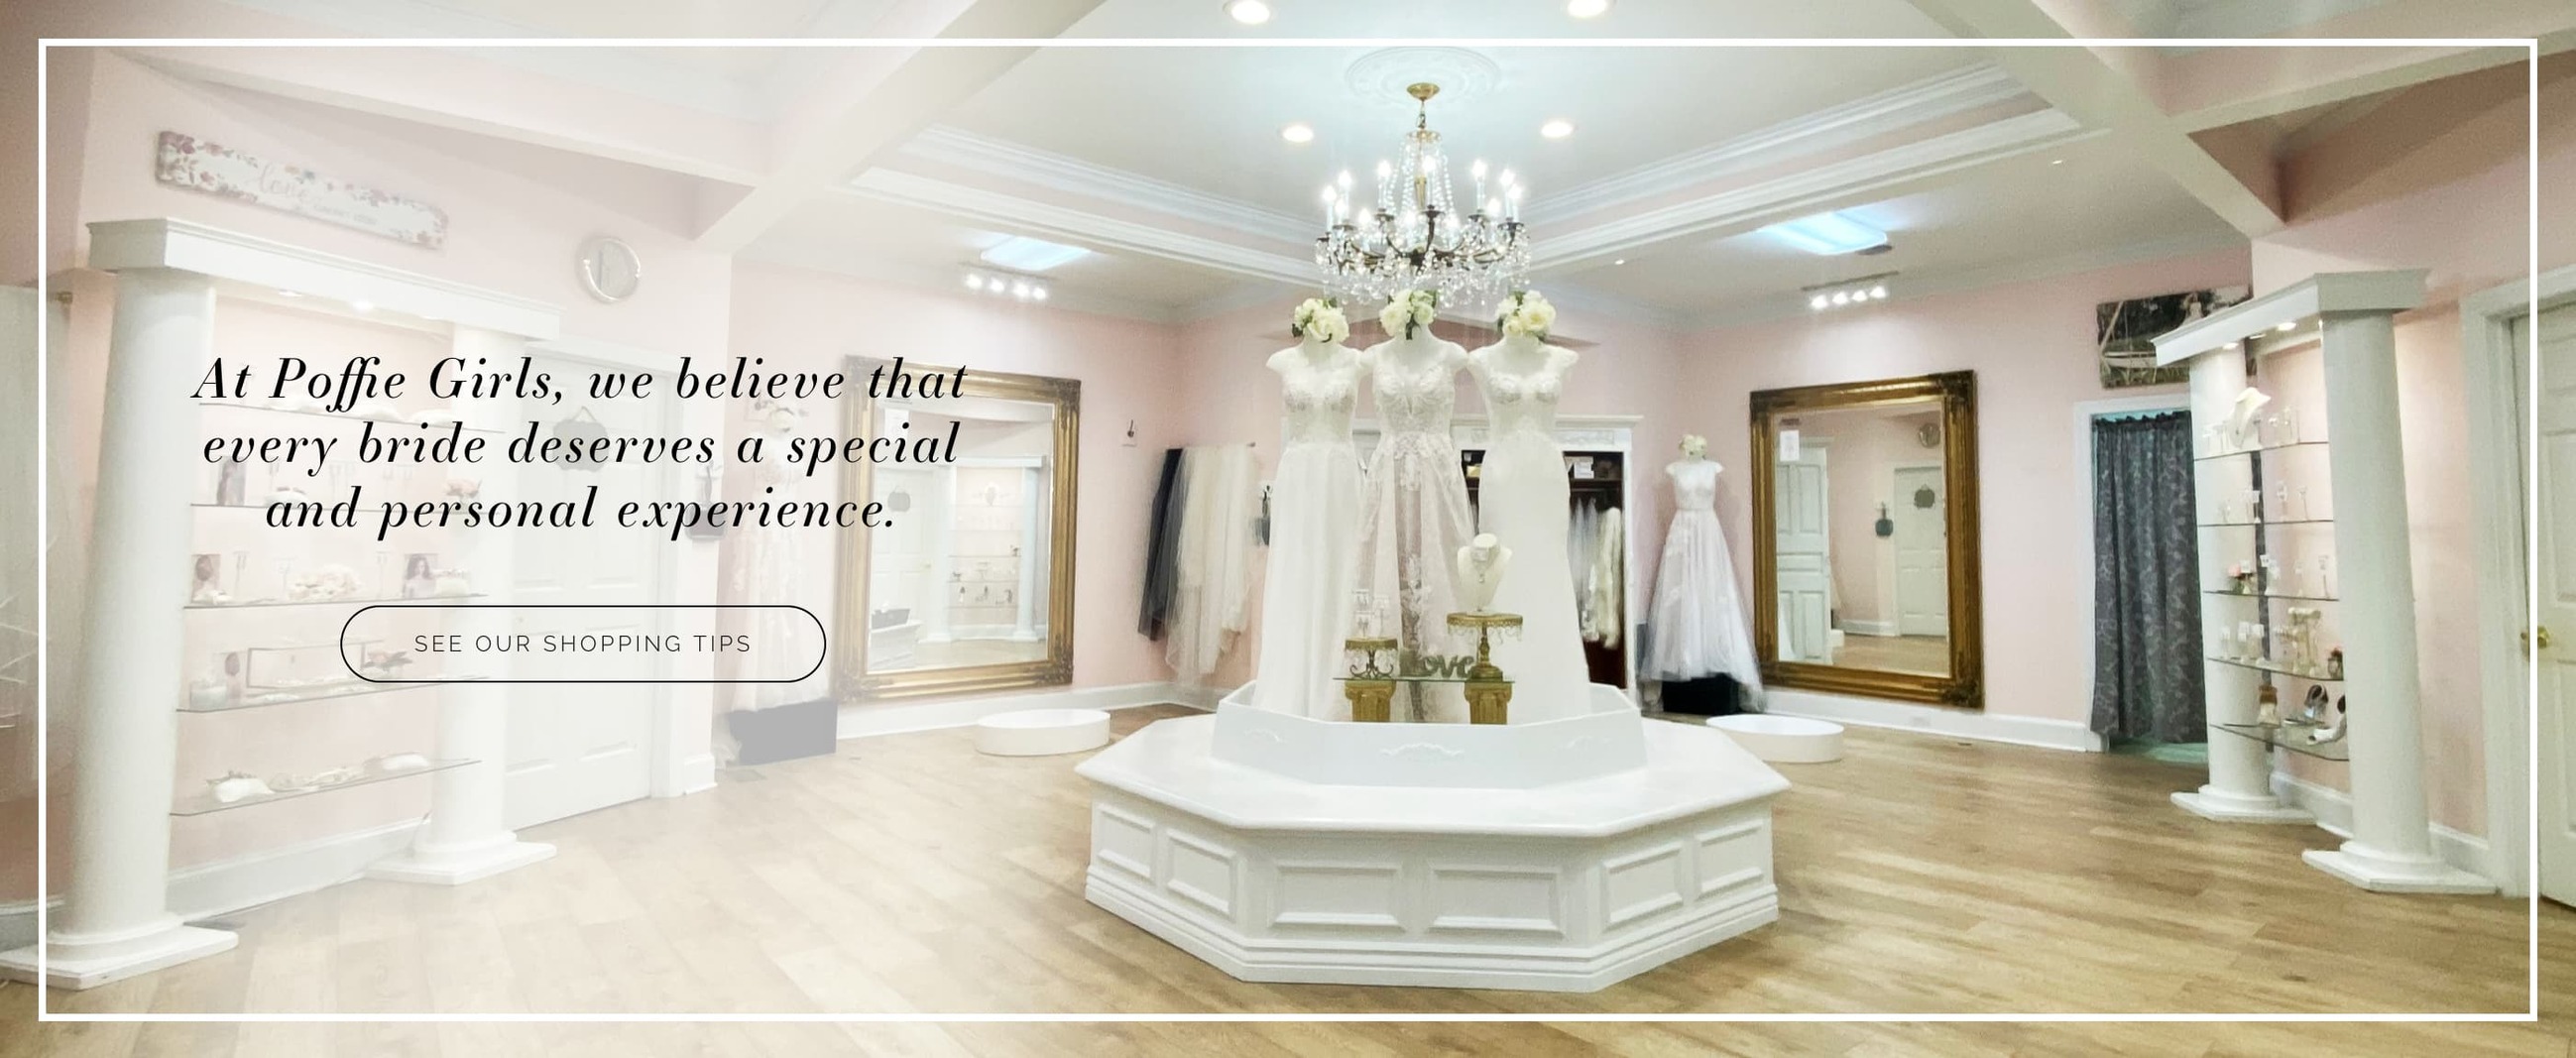 Overview of the bridal suite at Poffie Girls